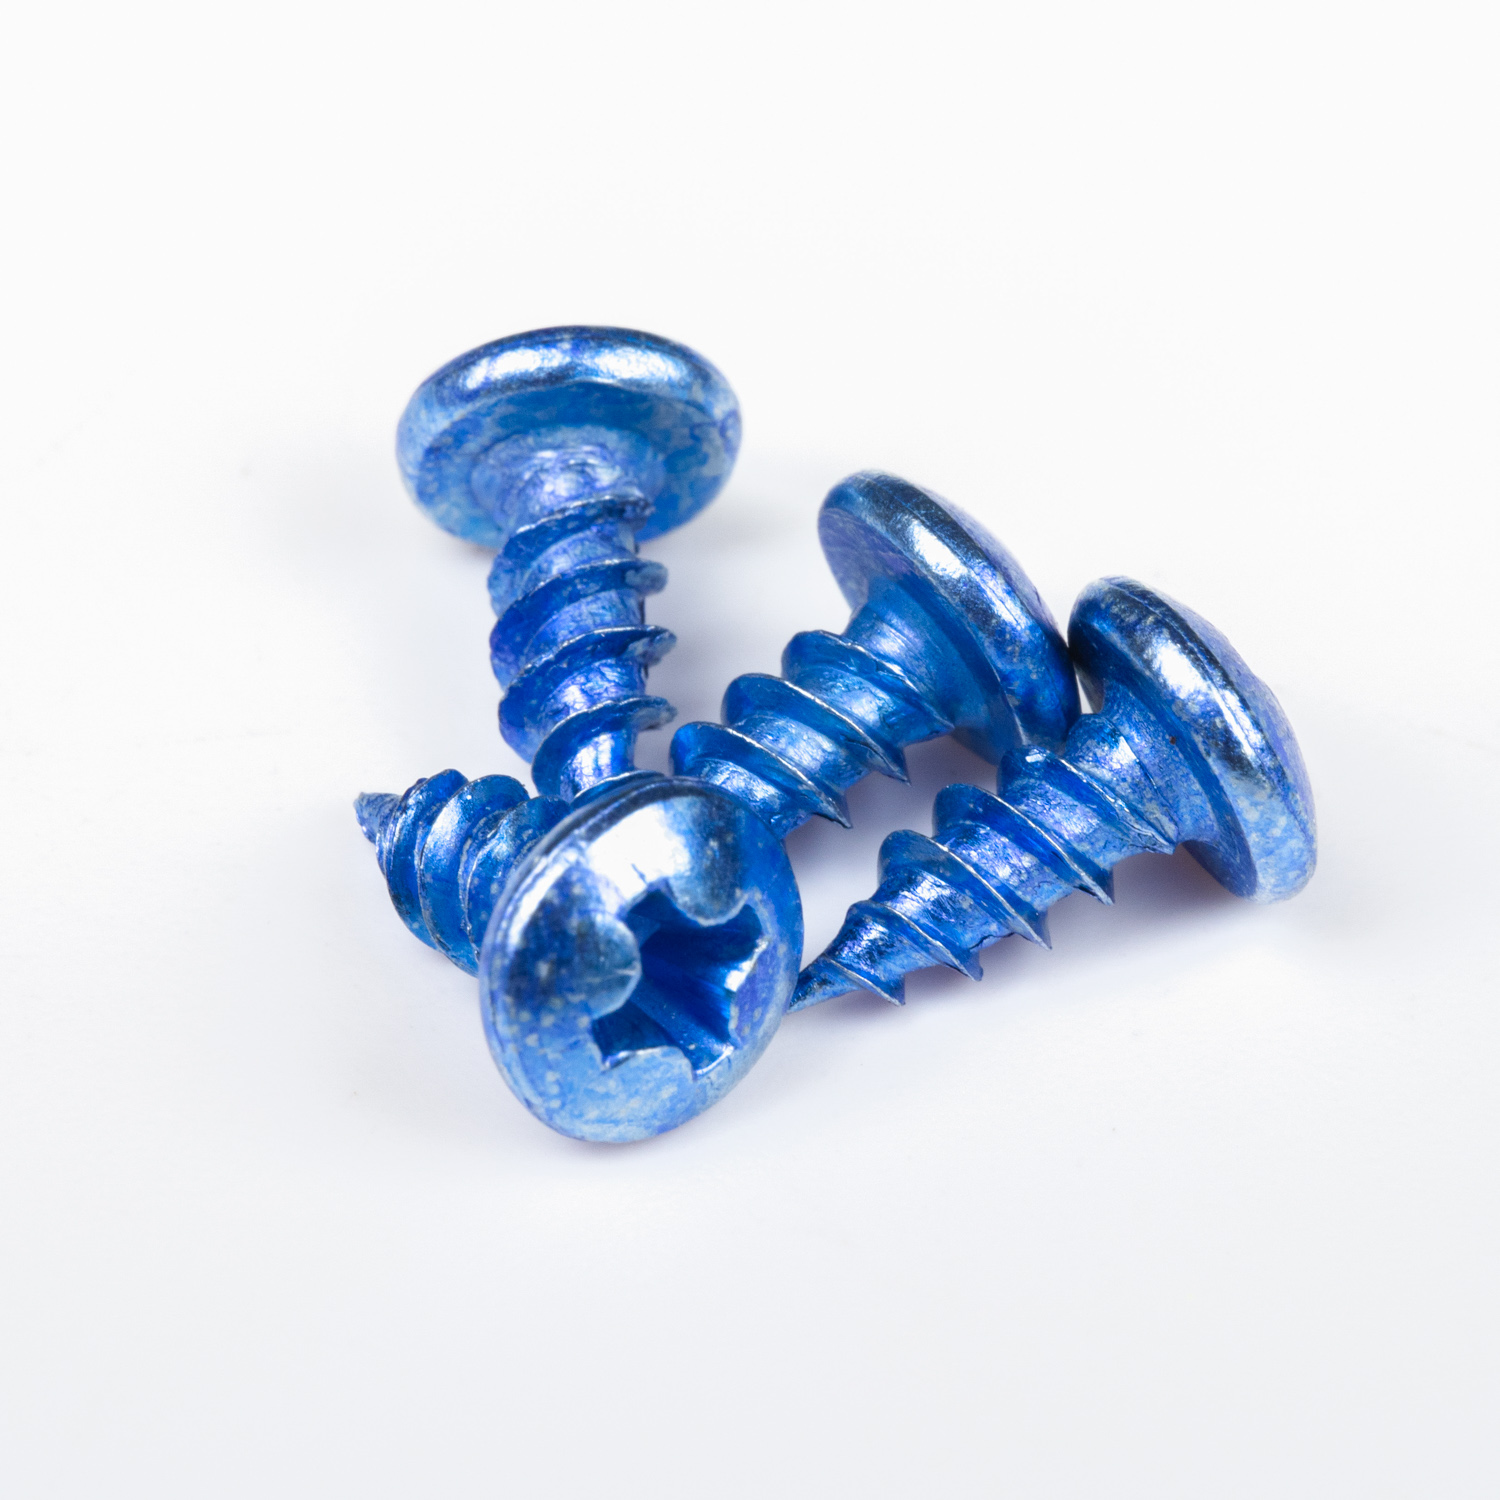 Pan Head Self Drilling/ Self Tapping Screws Featured Image